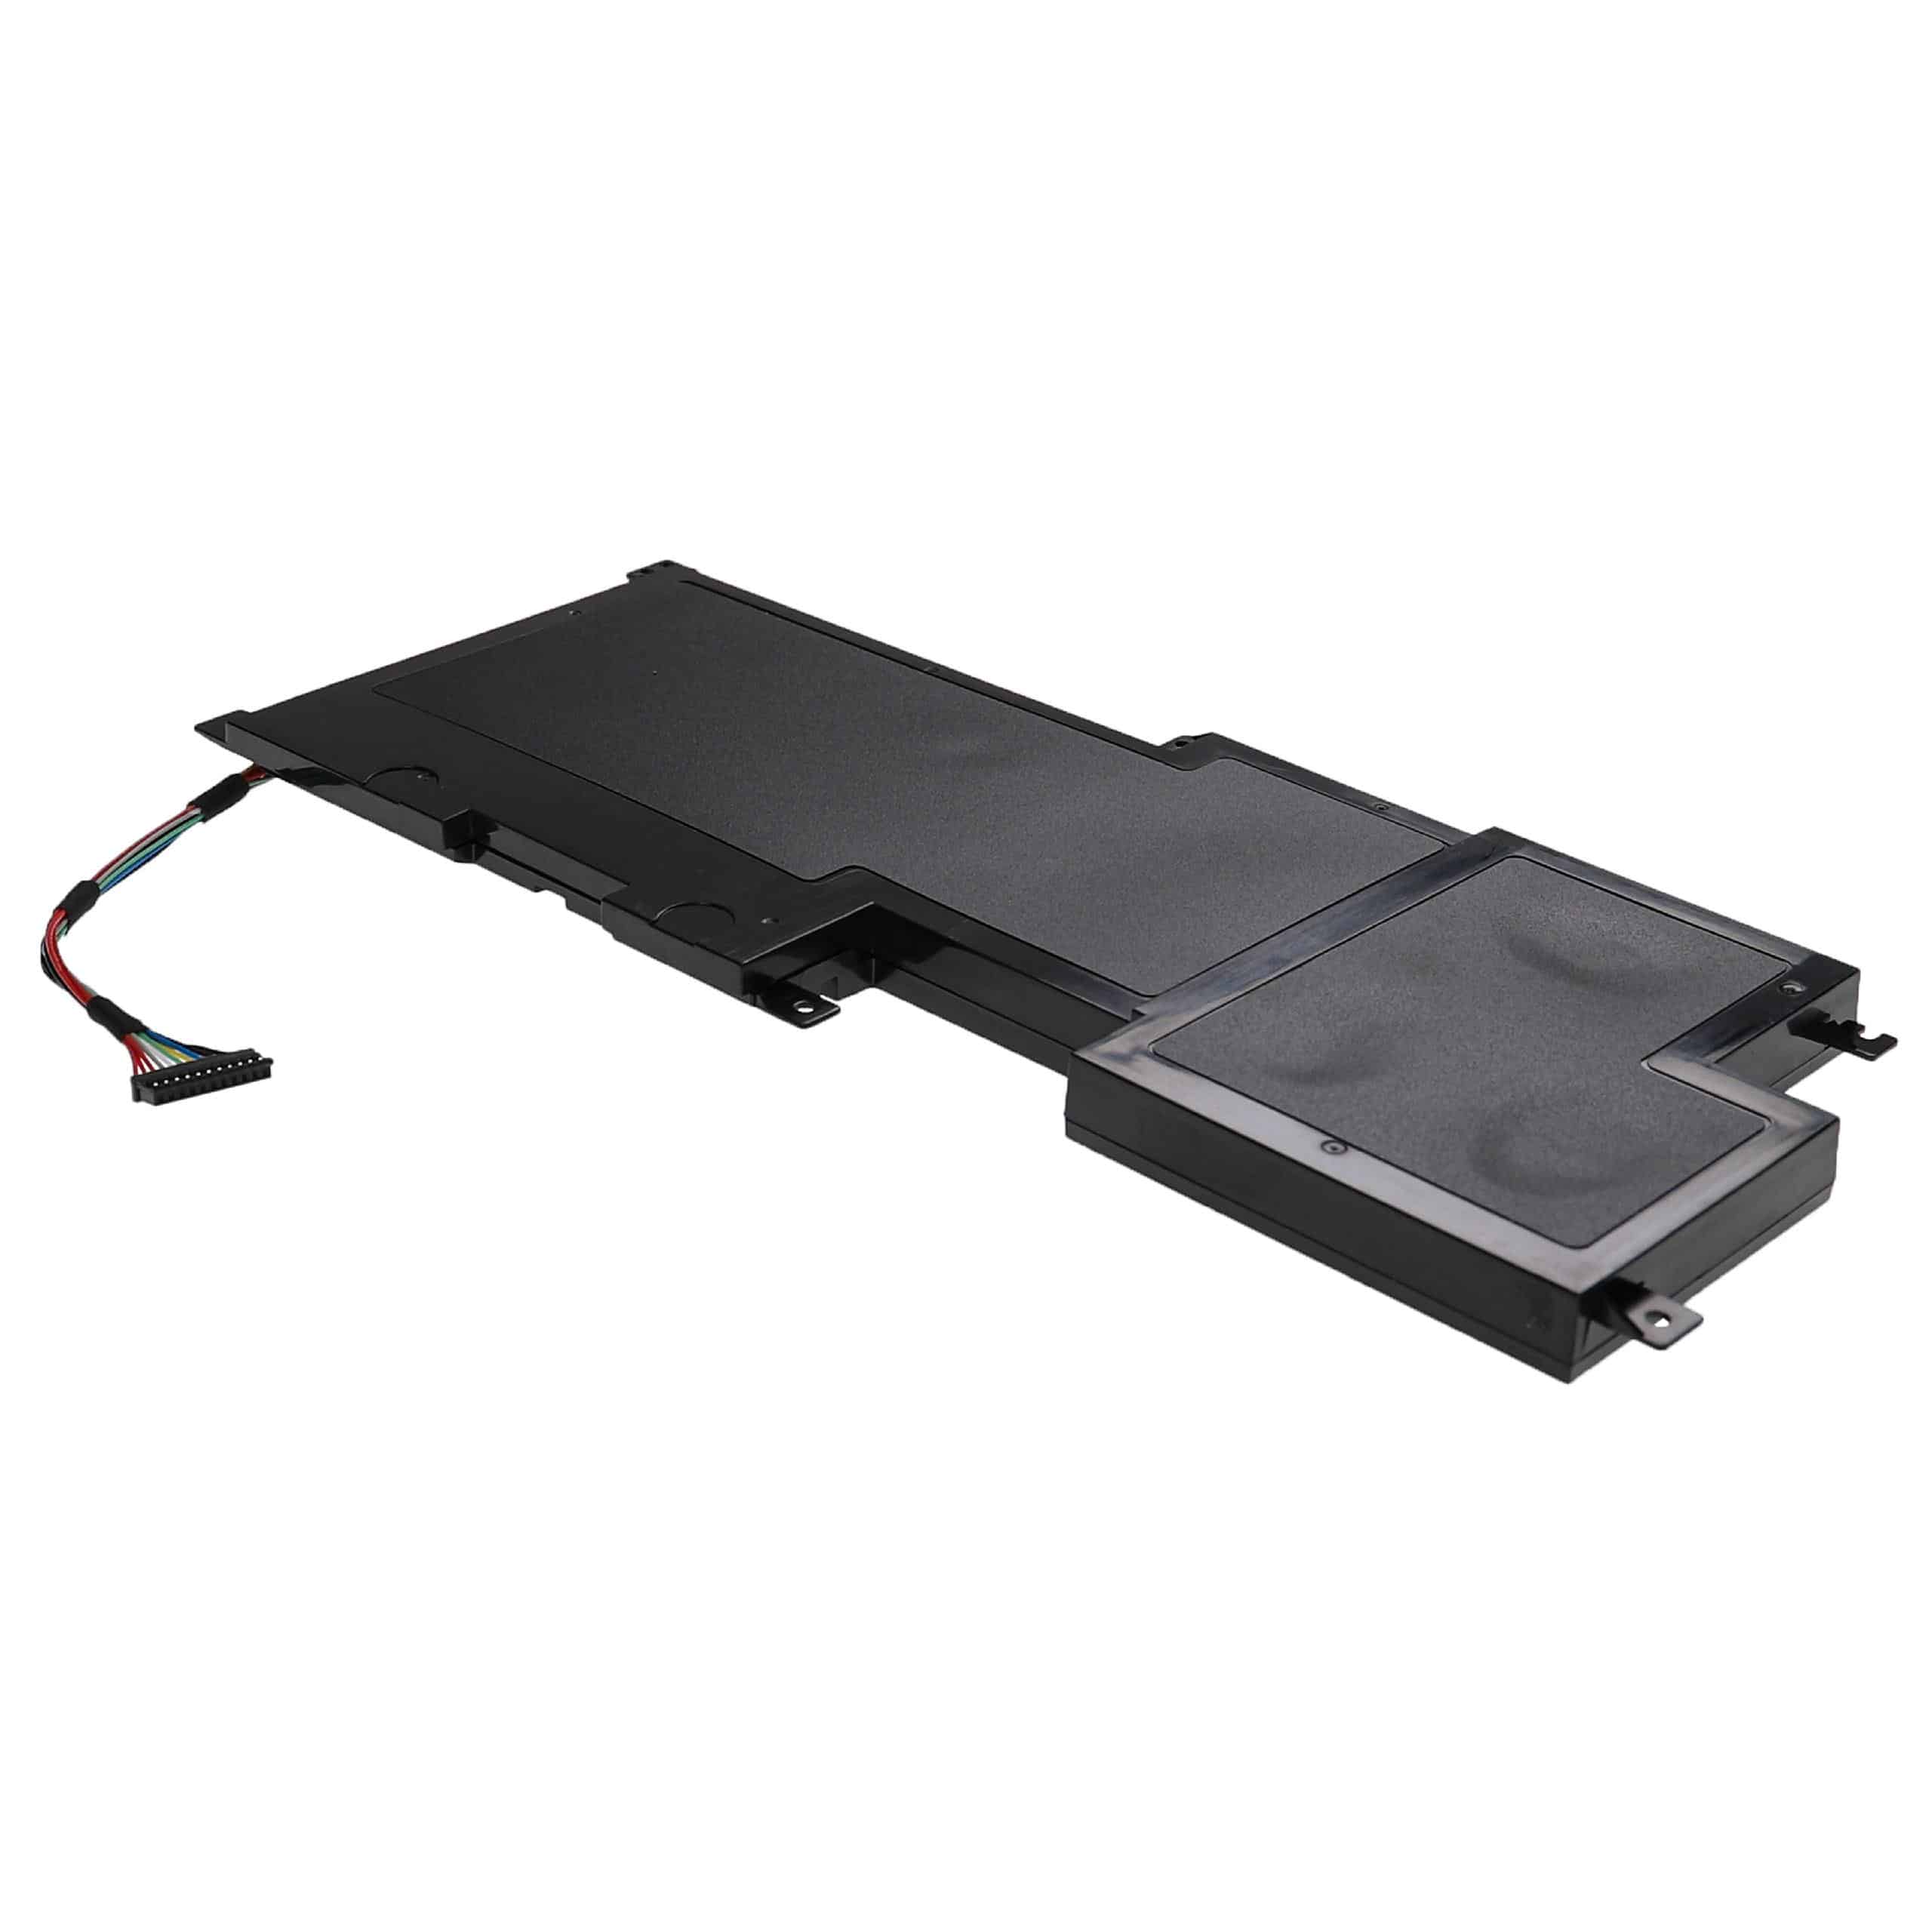 Notebook Battery Replacement for Dell 09F233, W0Y6W, WOY6W - 5500mAh 11.1V Li-polymer